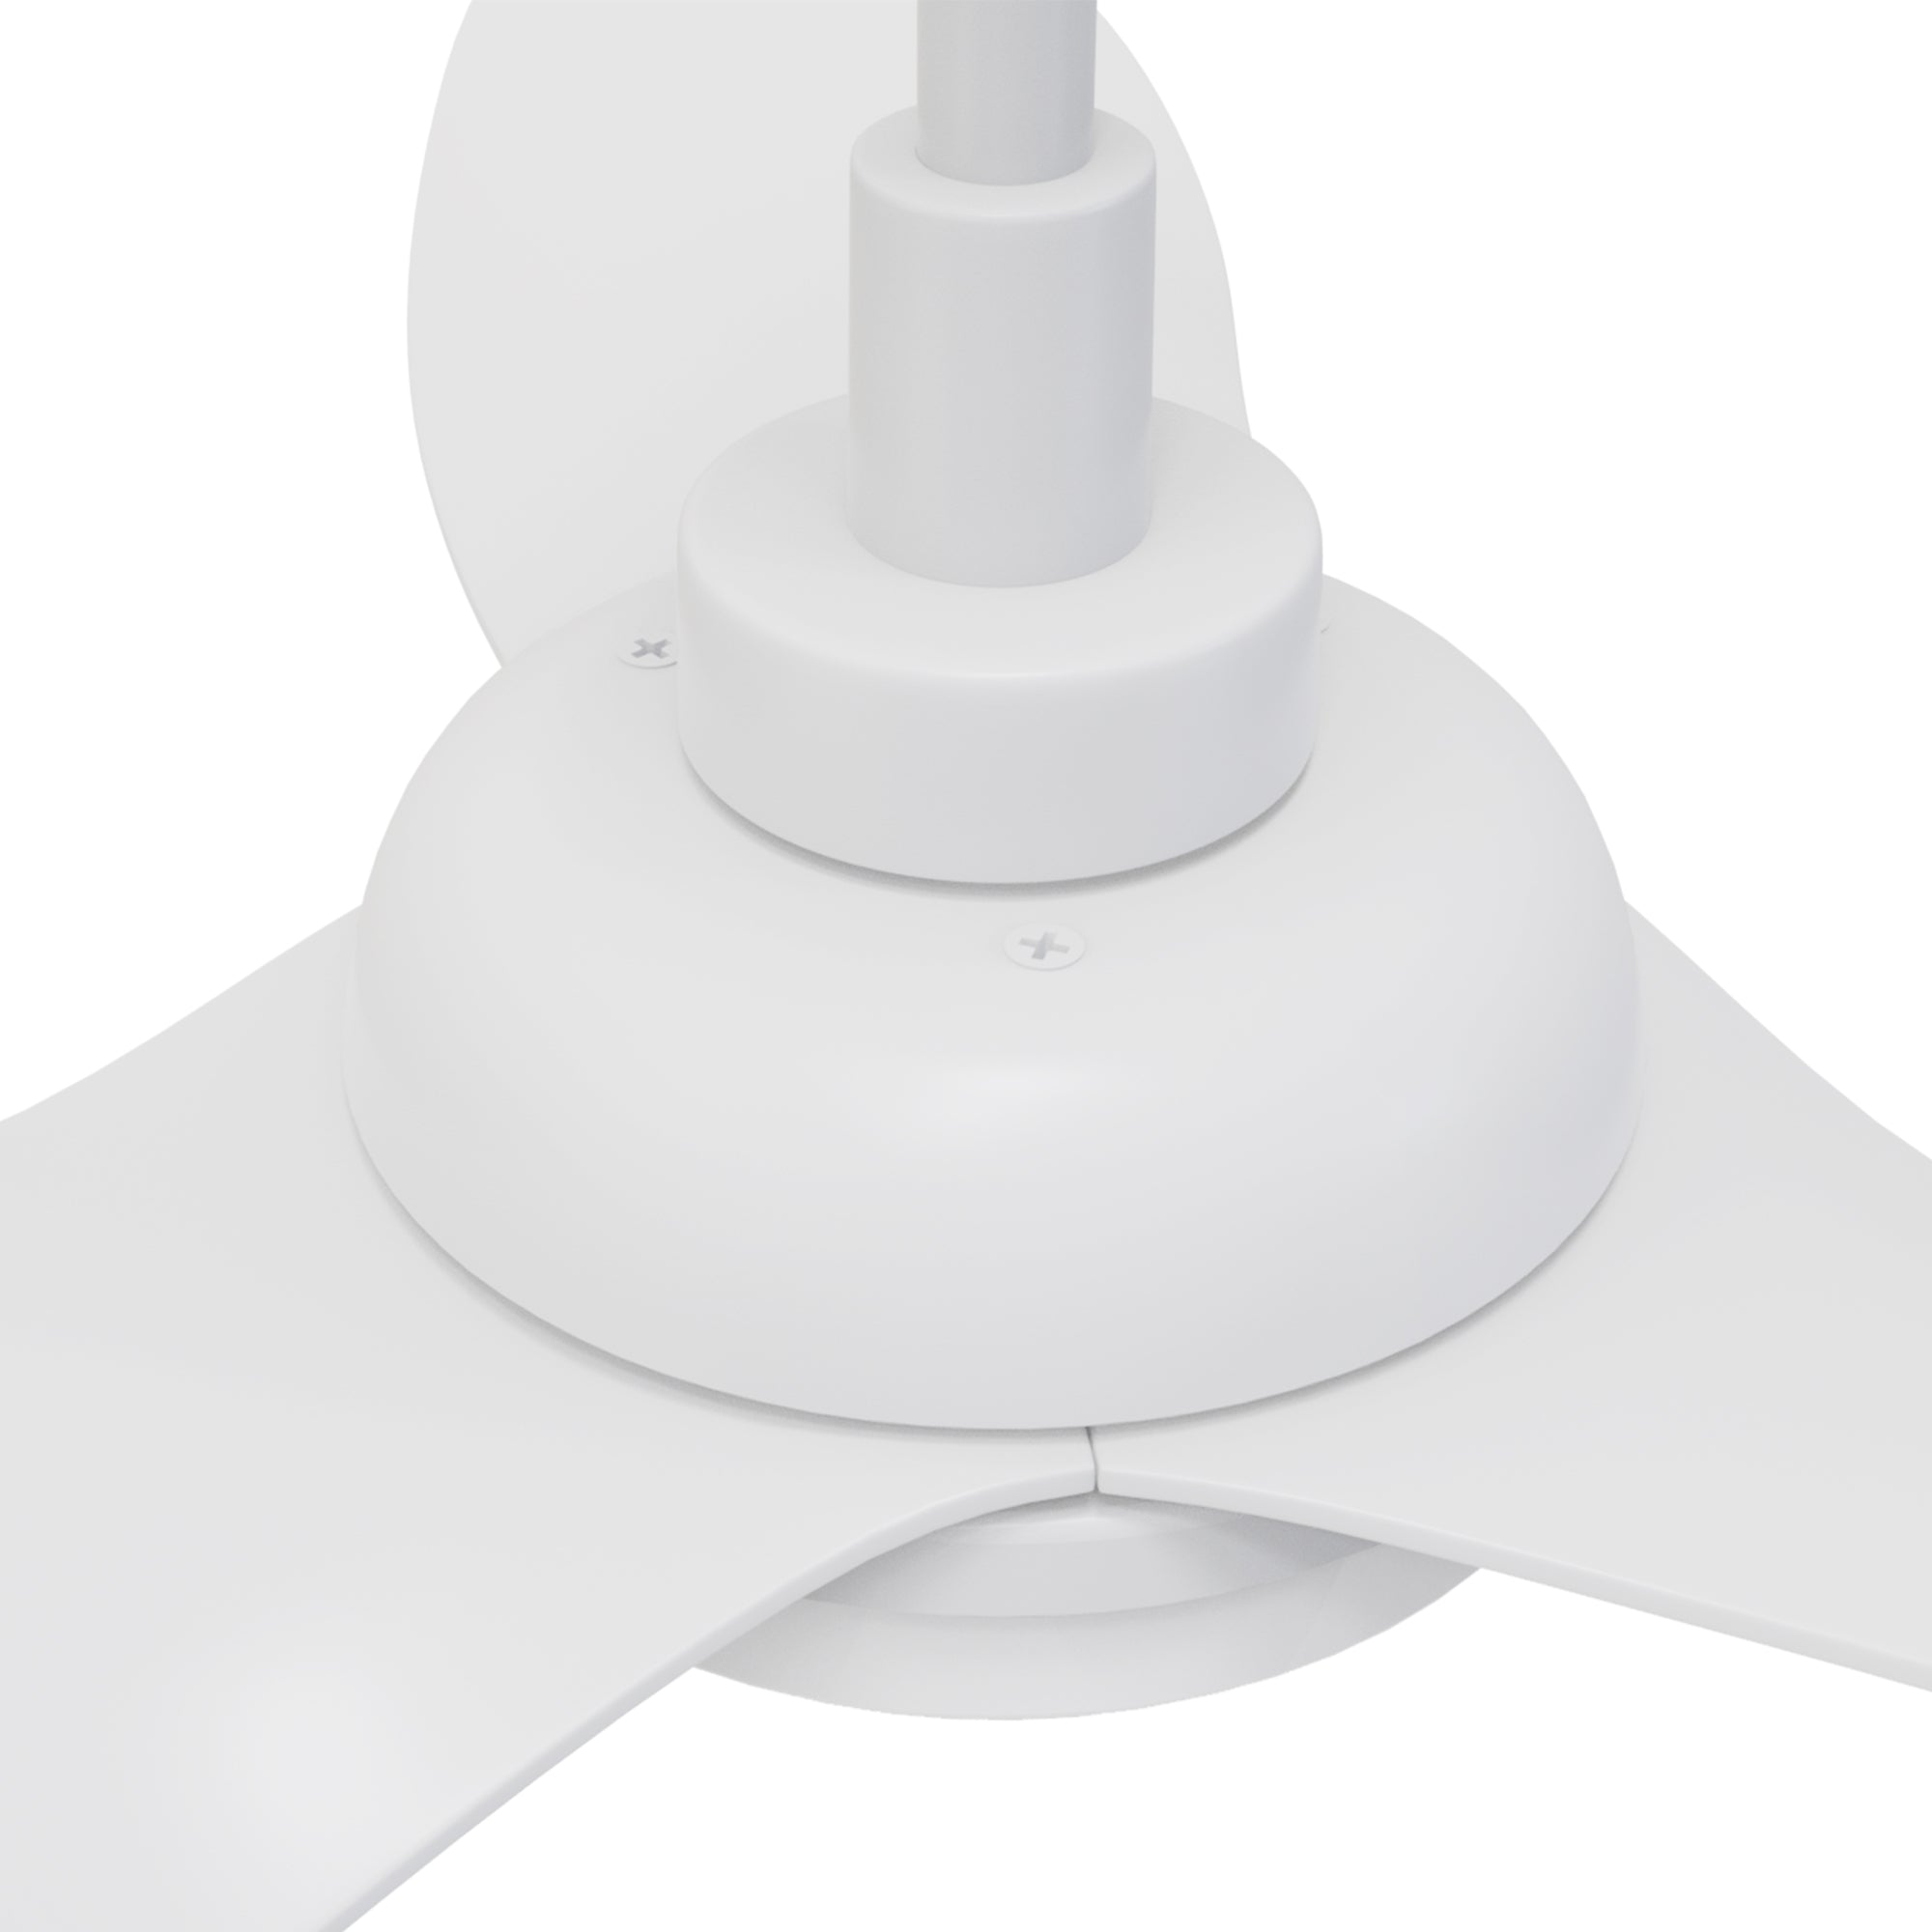 The Smafan 45&#39;&#39; Daisy Smart Ceiling Fan with 3 blades and a 45-inch blade sweep with a swift modern appearance. Its compact size is perfect for smaller bedrooms. It is made of a strong and durable ABS material in an all white finish. The 4k LED light kit is dimmable and can change between bright white and warm soft light temperatures. The fan features Remote control, Wi-Fi apps, Siri Shortcut and Voice control technology (compatible with Amazon Alexa and Google Home Assistant ) to set fan preferences.